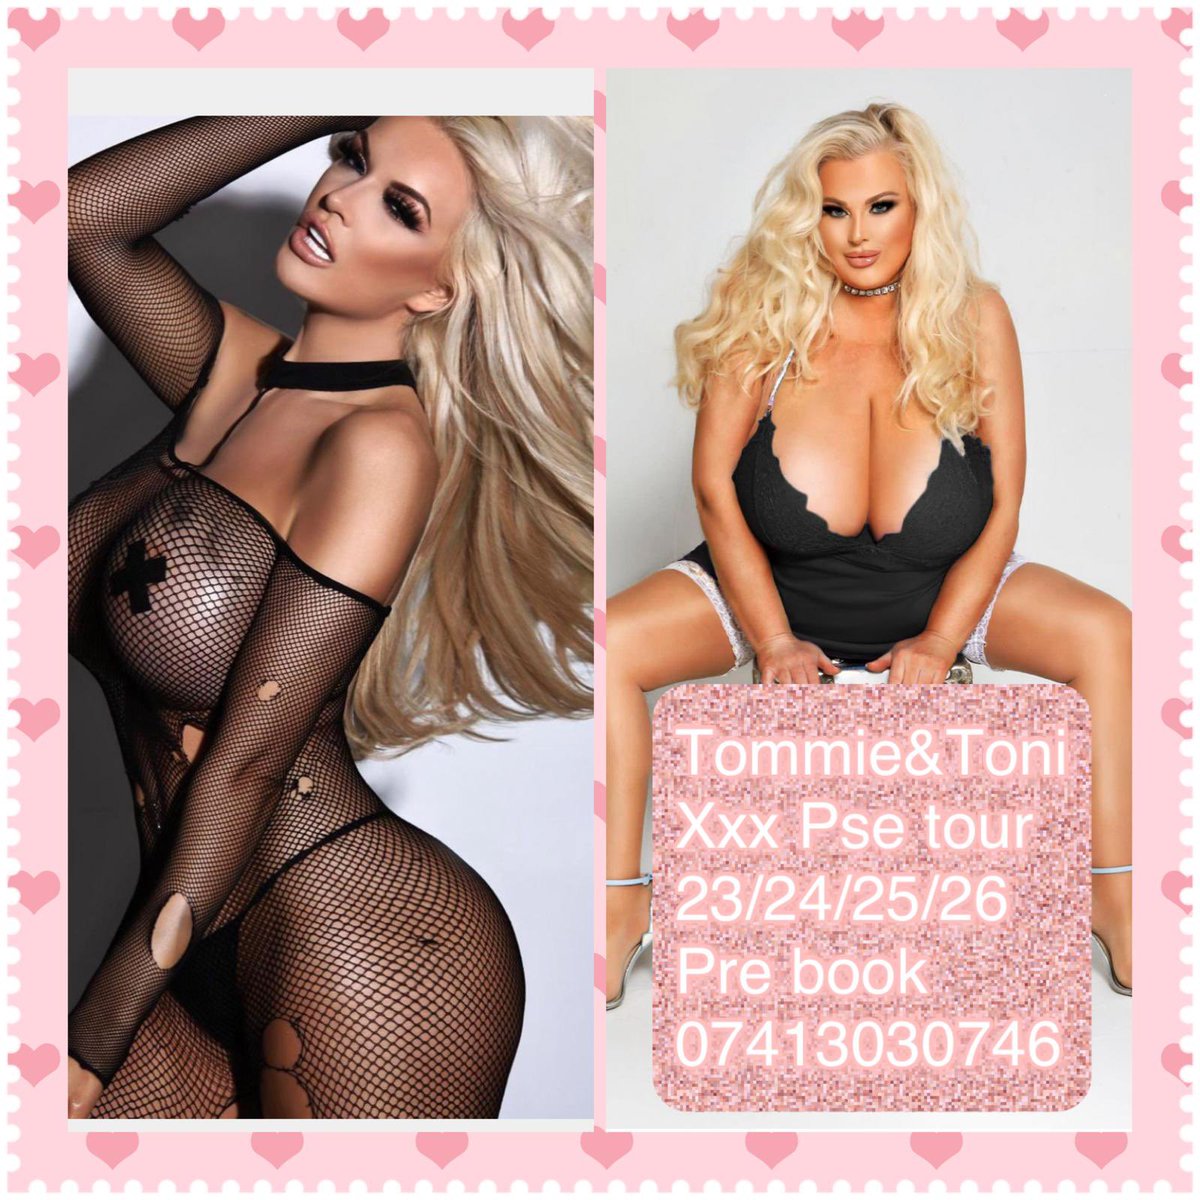 Duo with the gorgeous porn queen ❤️ London Tour 23rd-26th April tommiejobabe@yahoo.com